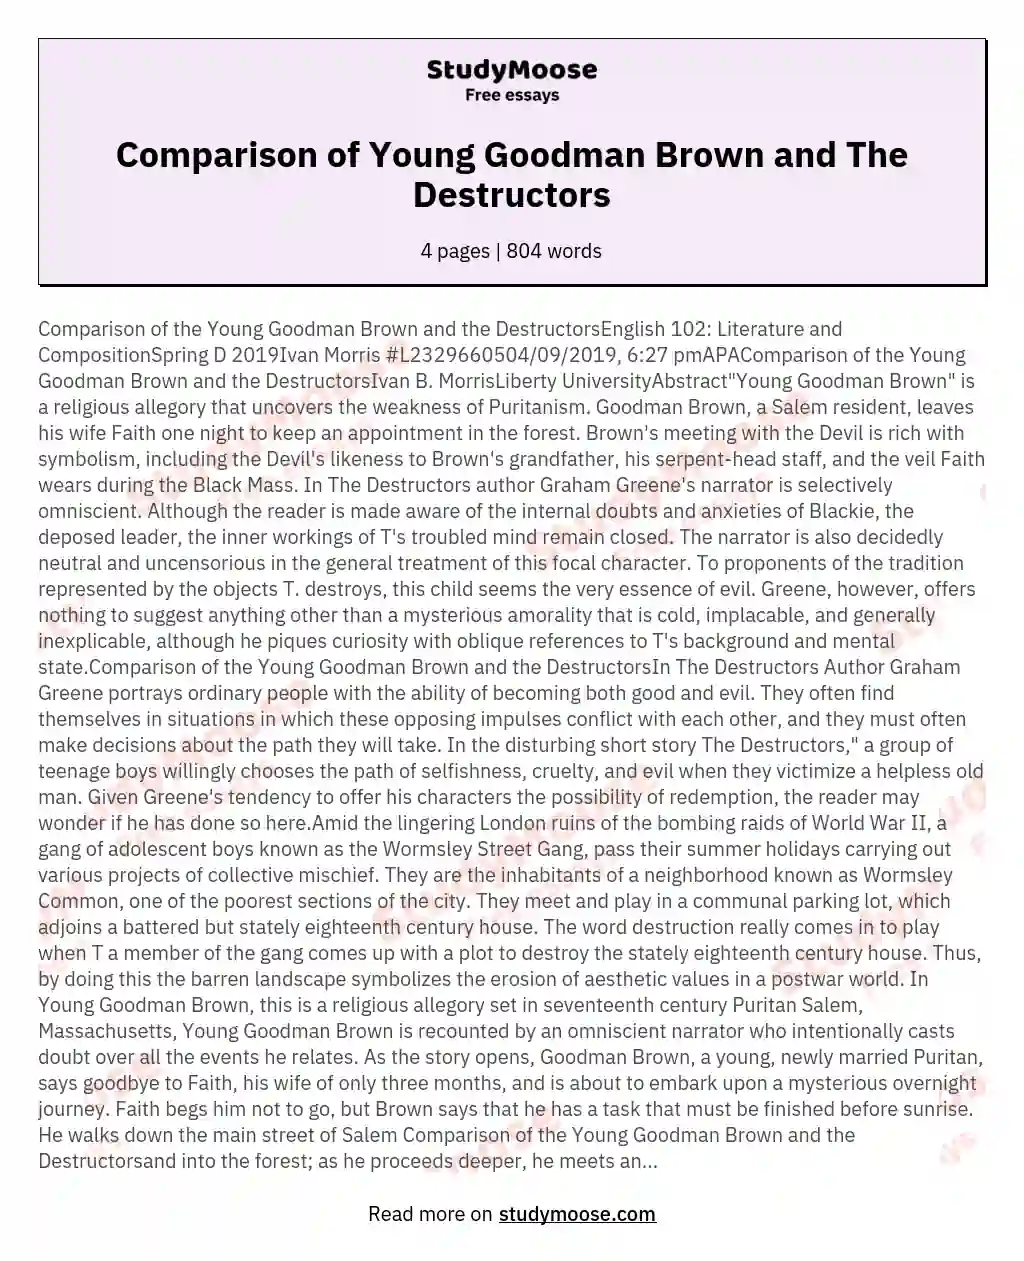 Comparison of the Young Goodman Brown and the DestructorsEnglish 102 Literature and